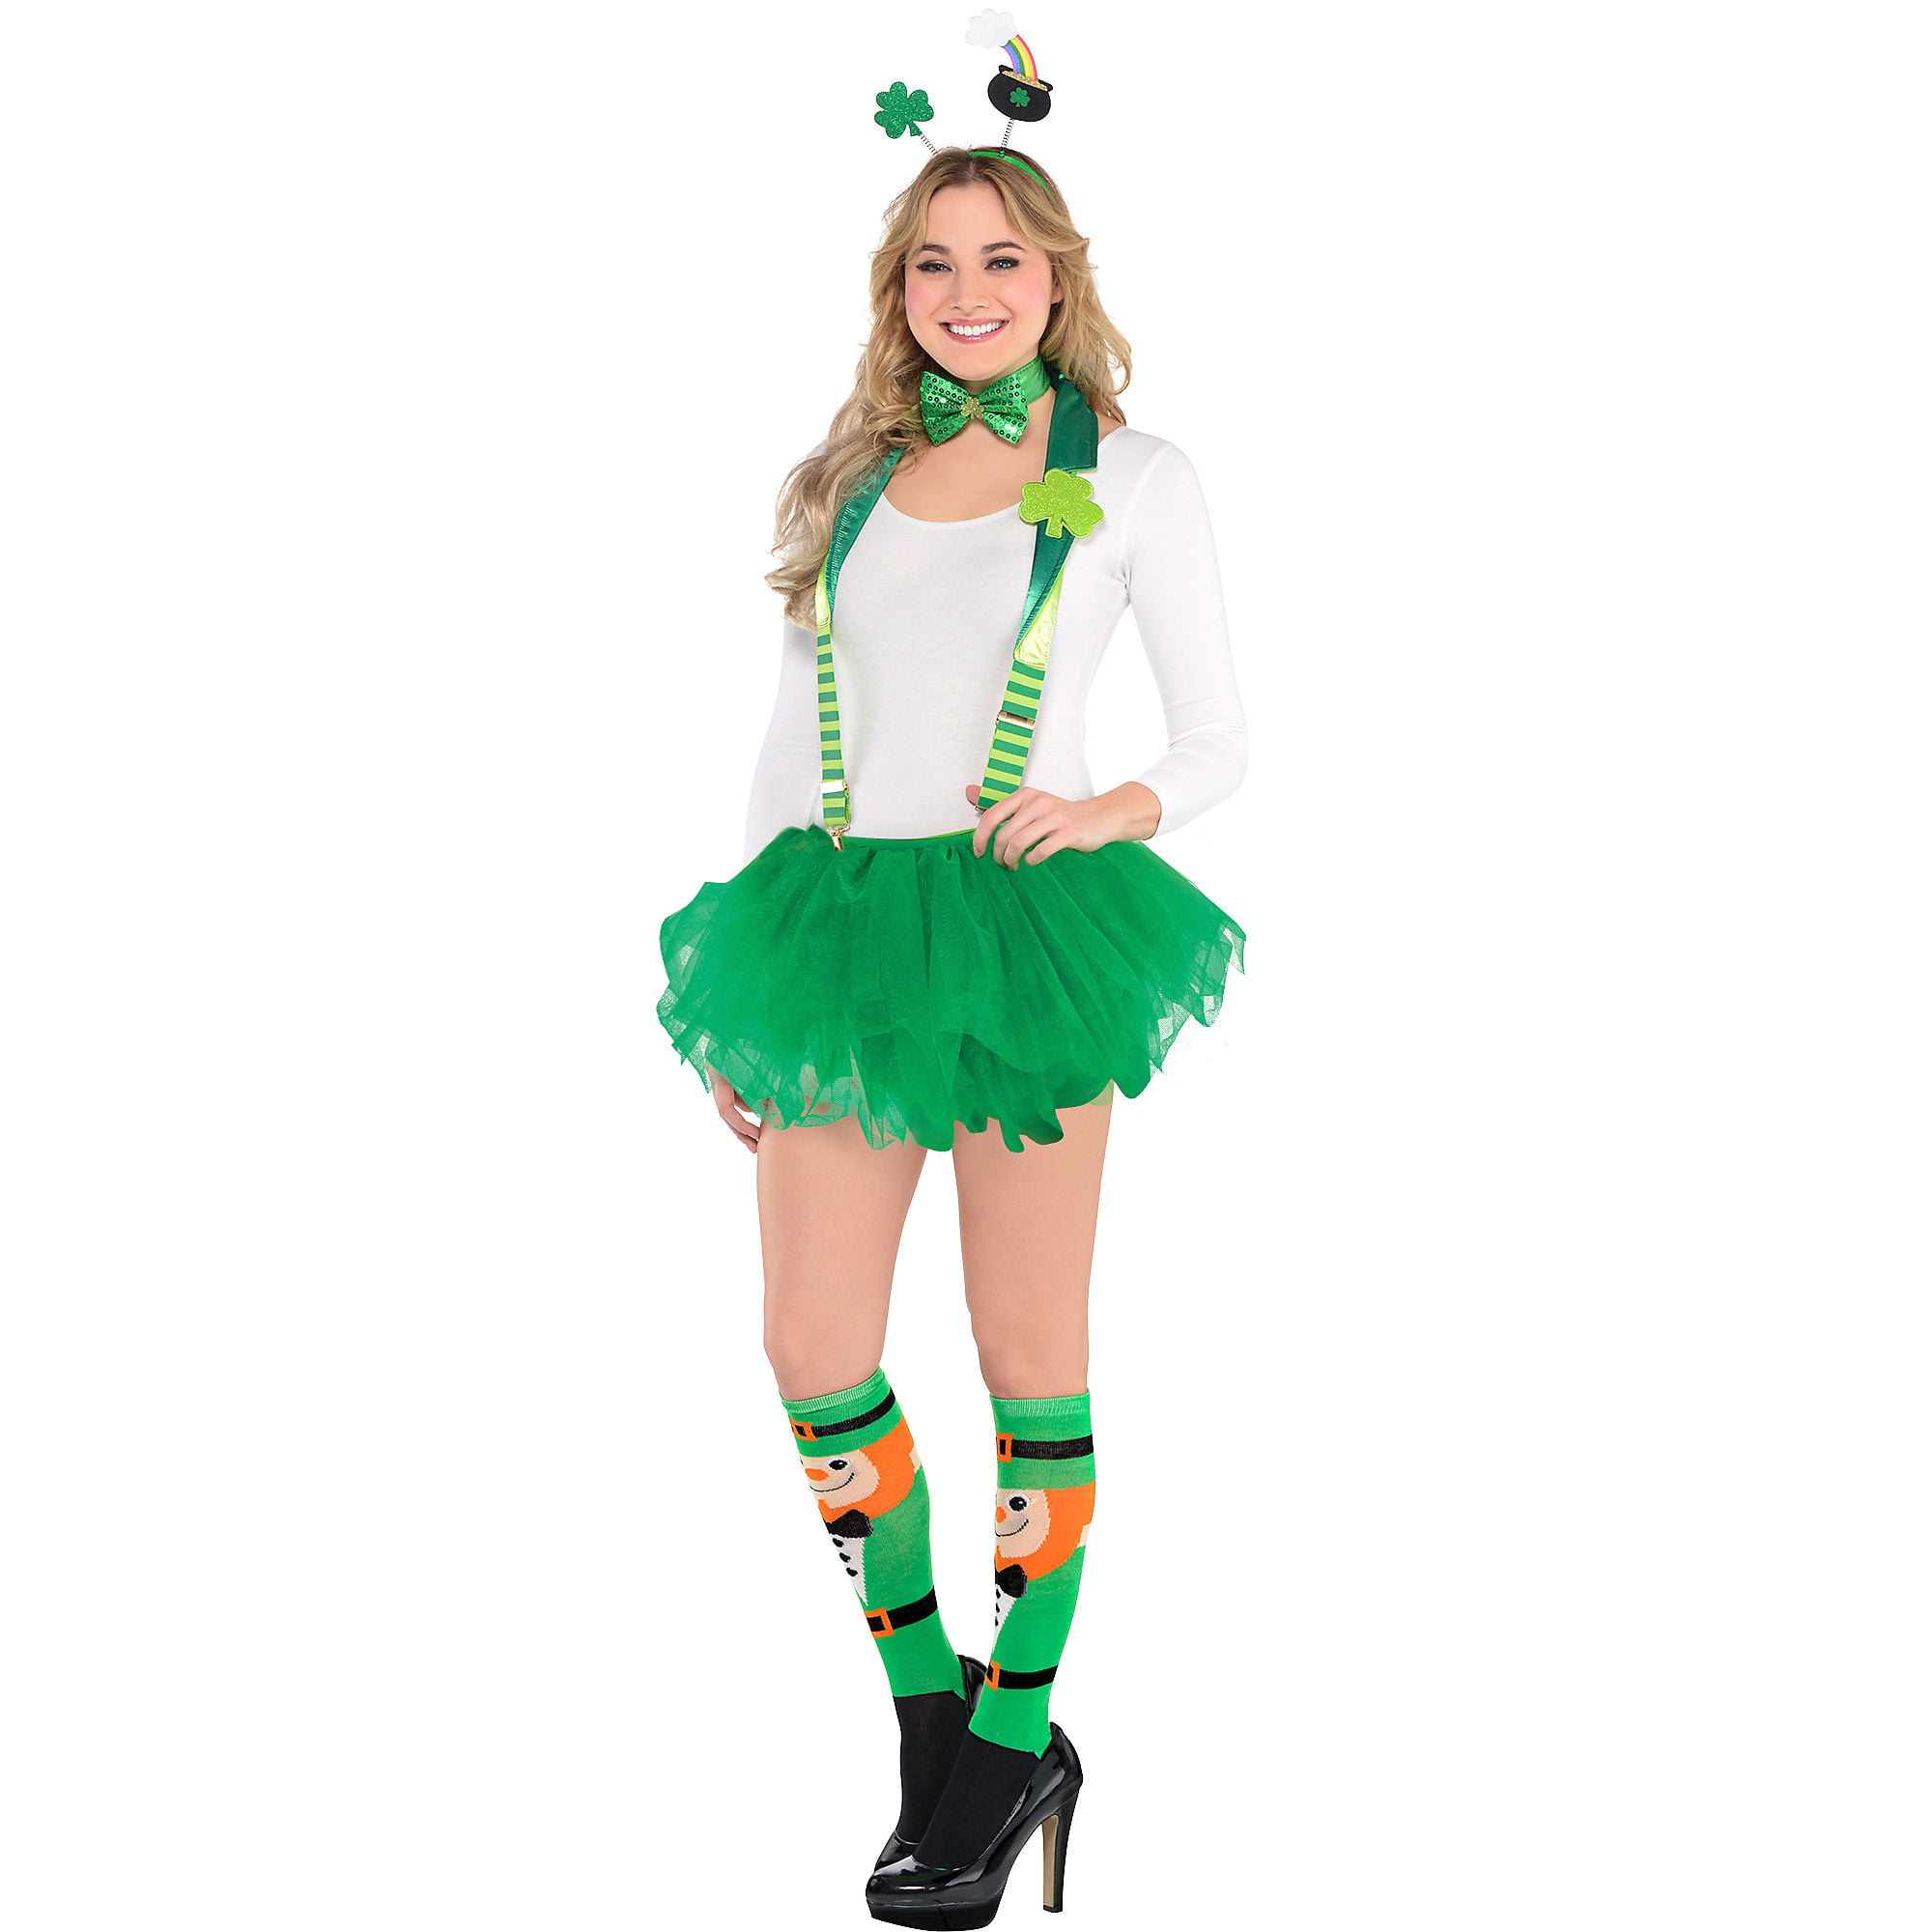 Clothing Shoes And Accessories St Patrick Day Irish Ladies Girls Fancy Dress Costume Headbopper